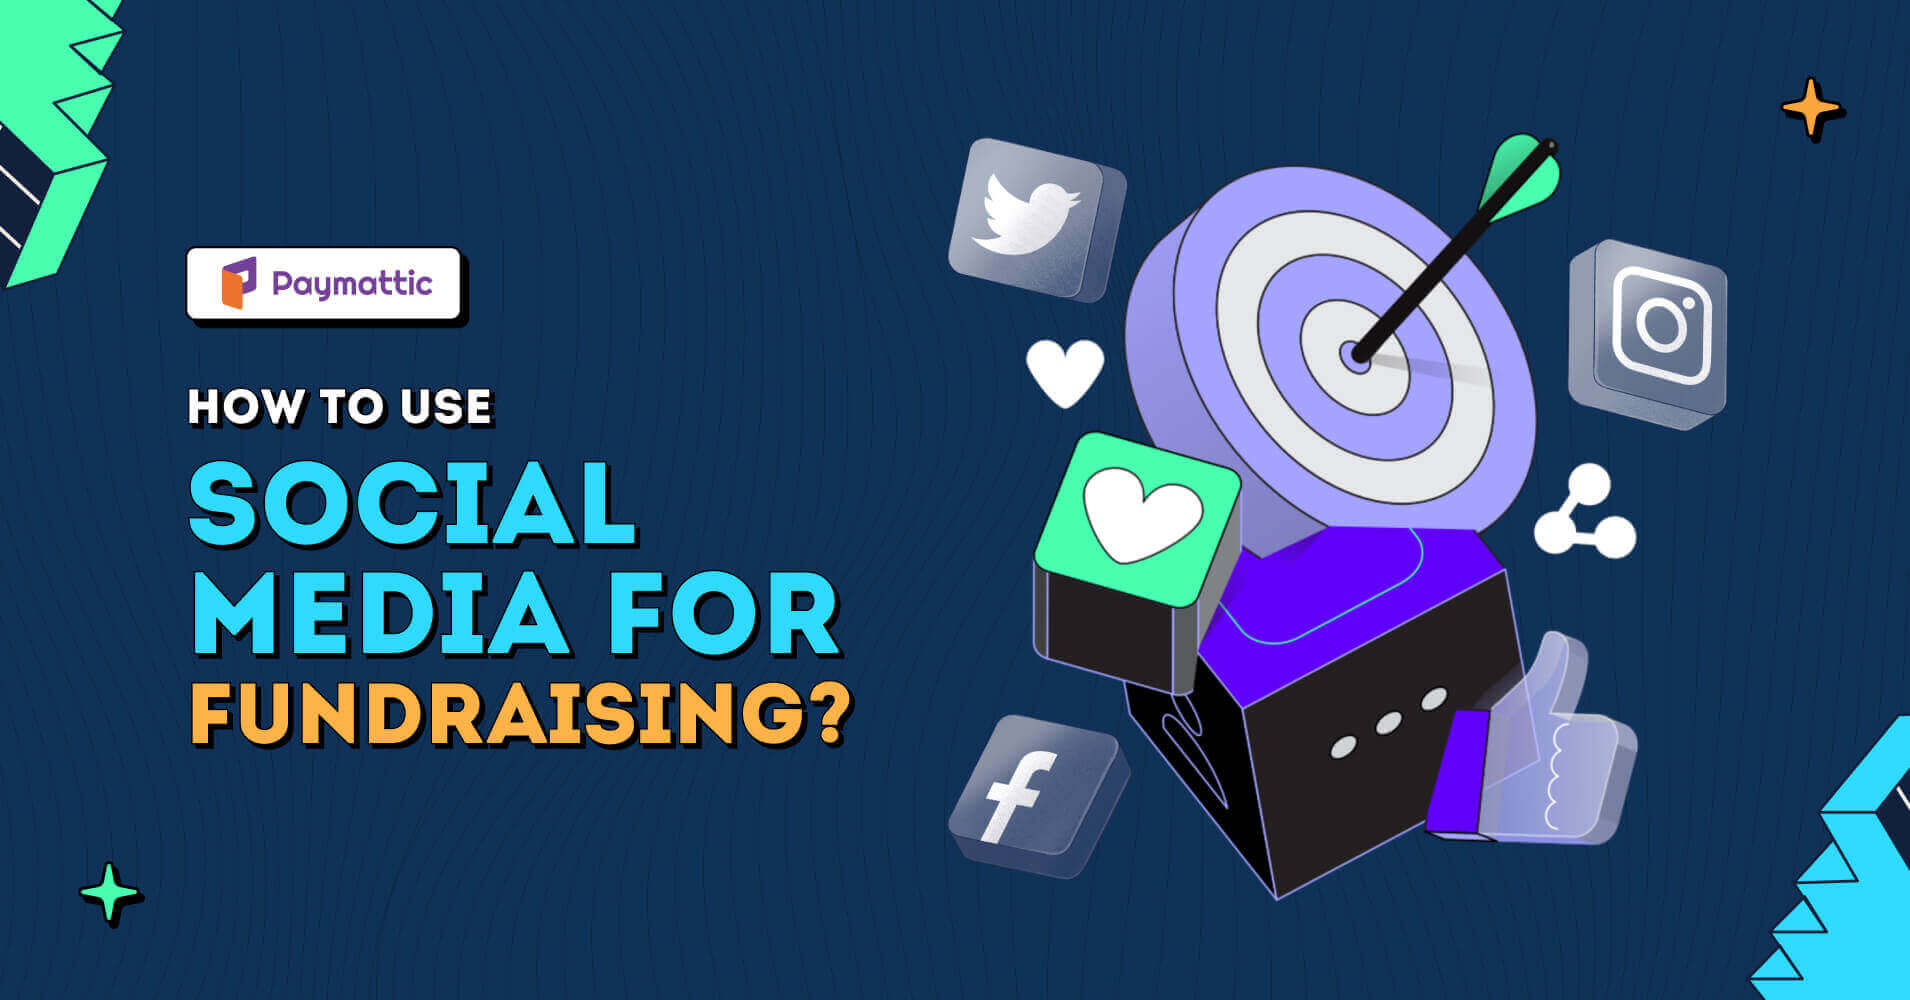 How to use social media for fundraising